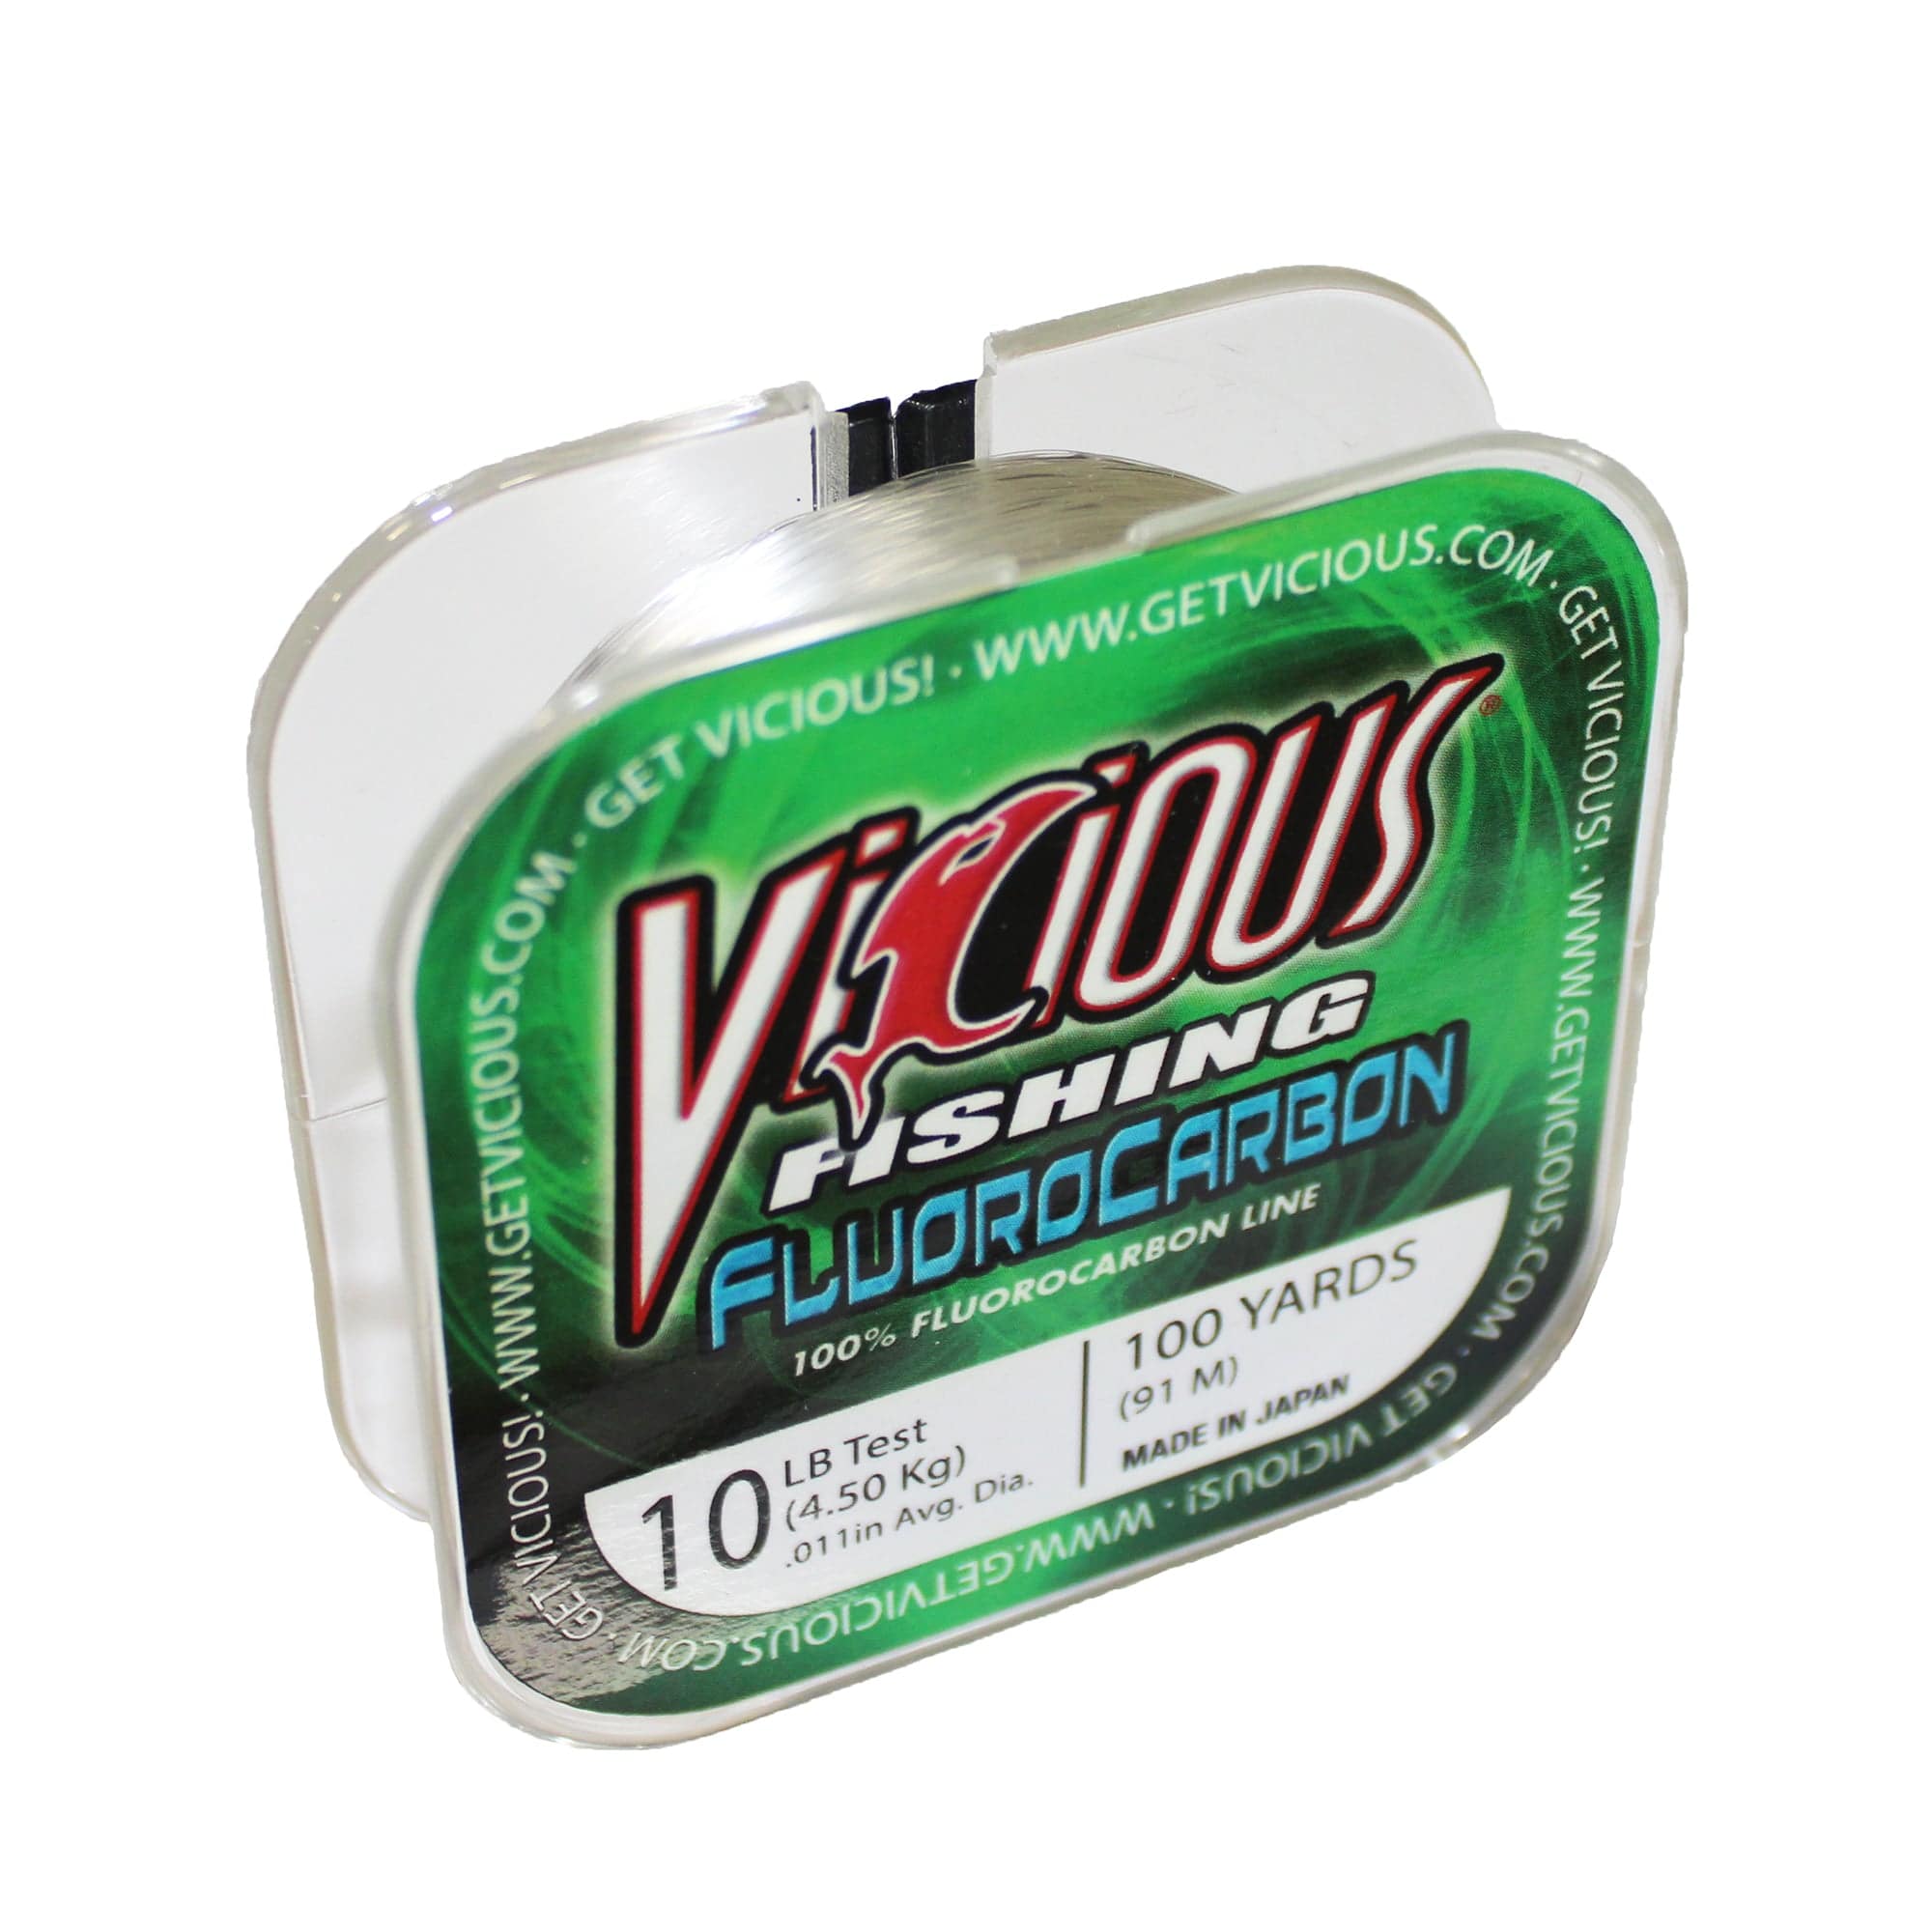 New! Vicious Crystal Clear 100% Japanese Fluorocarbon Fishing Line